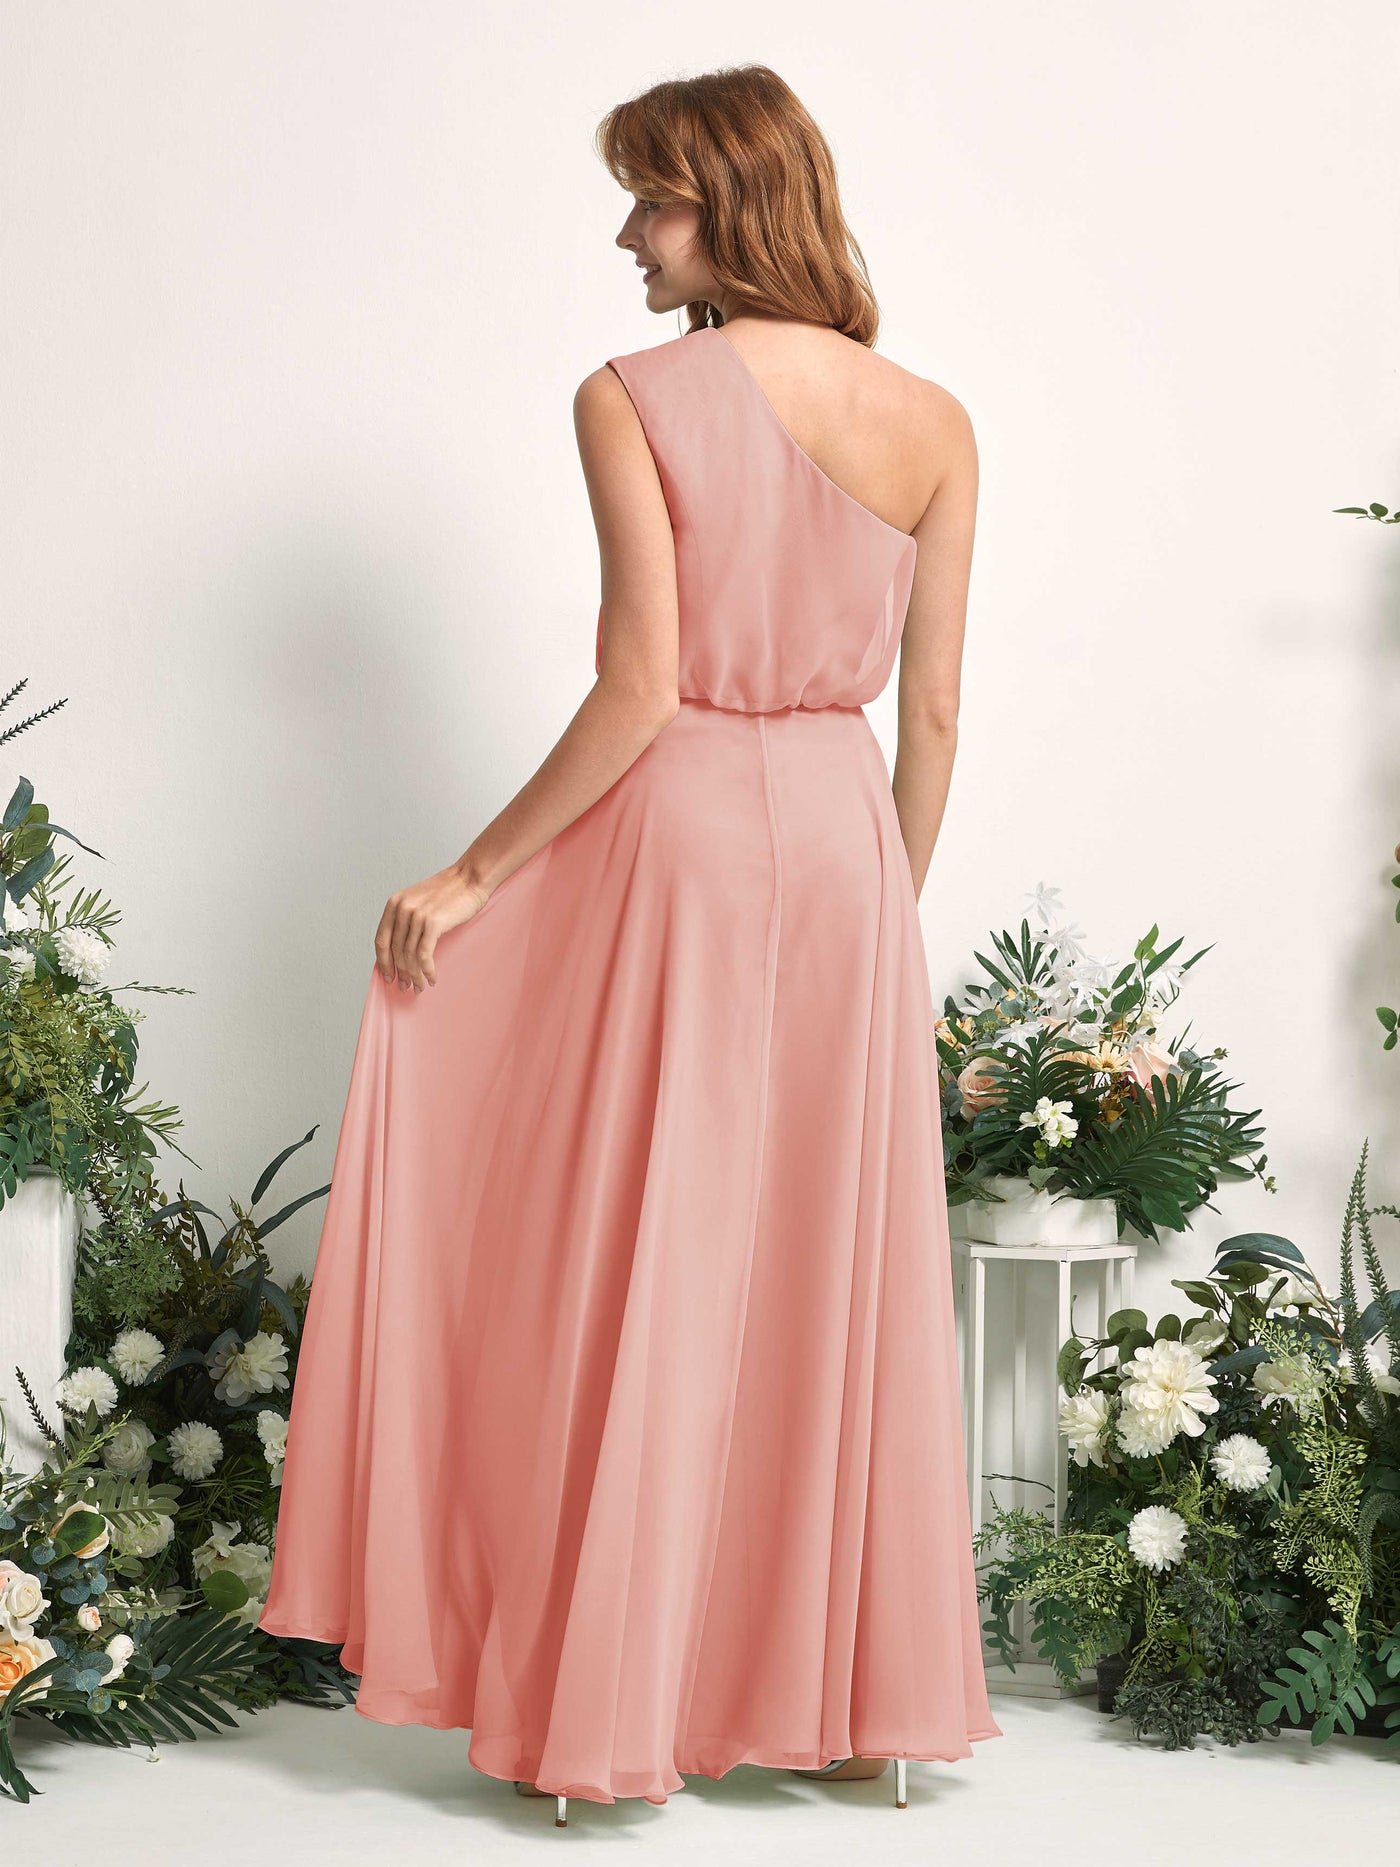 Bridesmaid Dress A-line Chiffon One Shoulder Full Length Sleeveless Wedding Party Dress - Champagne Rose (81226806)#color_champagne-rose